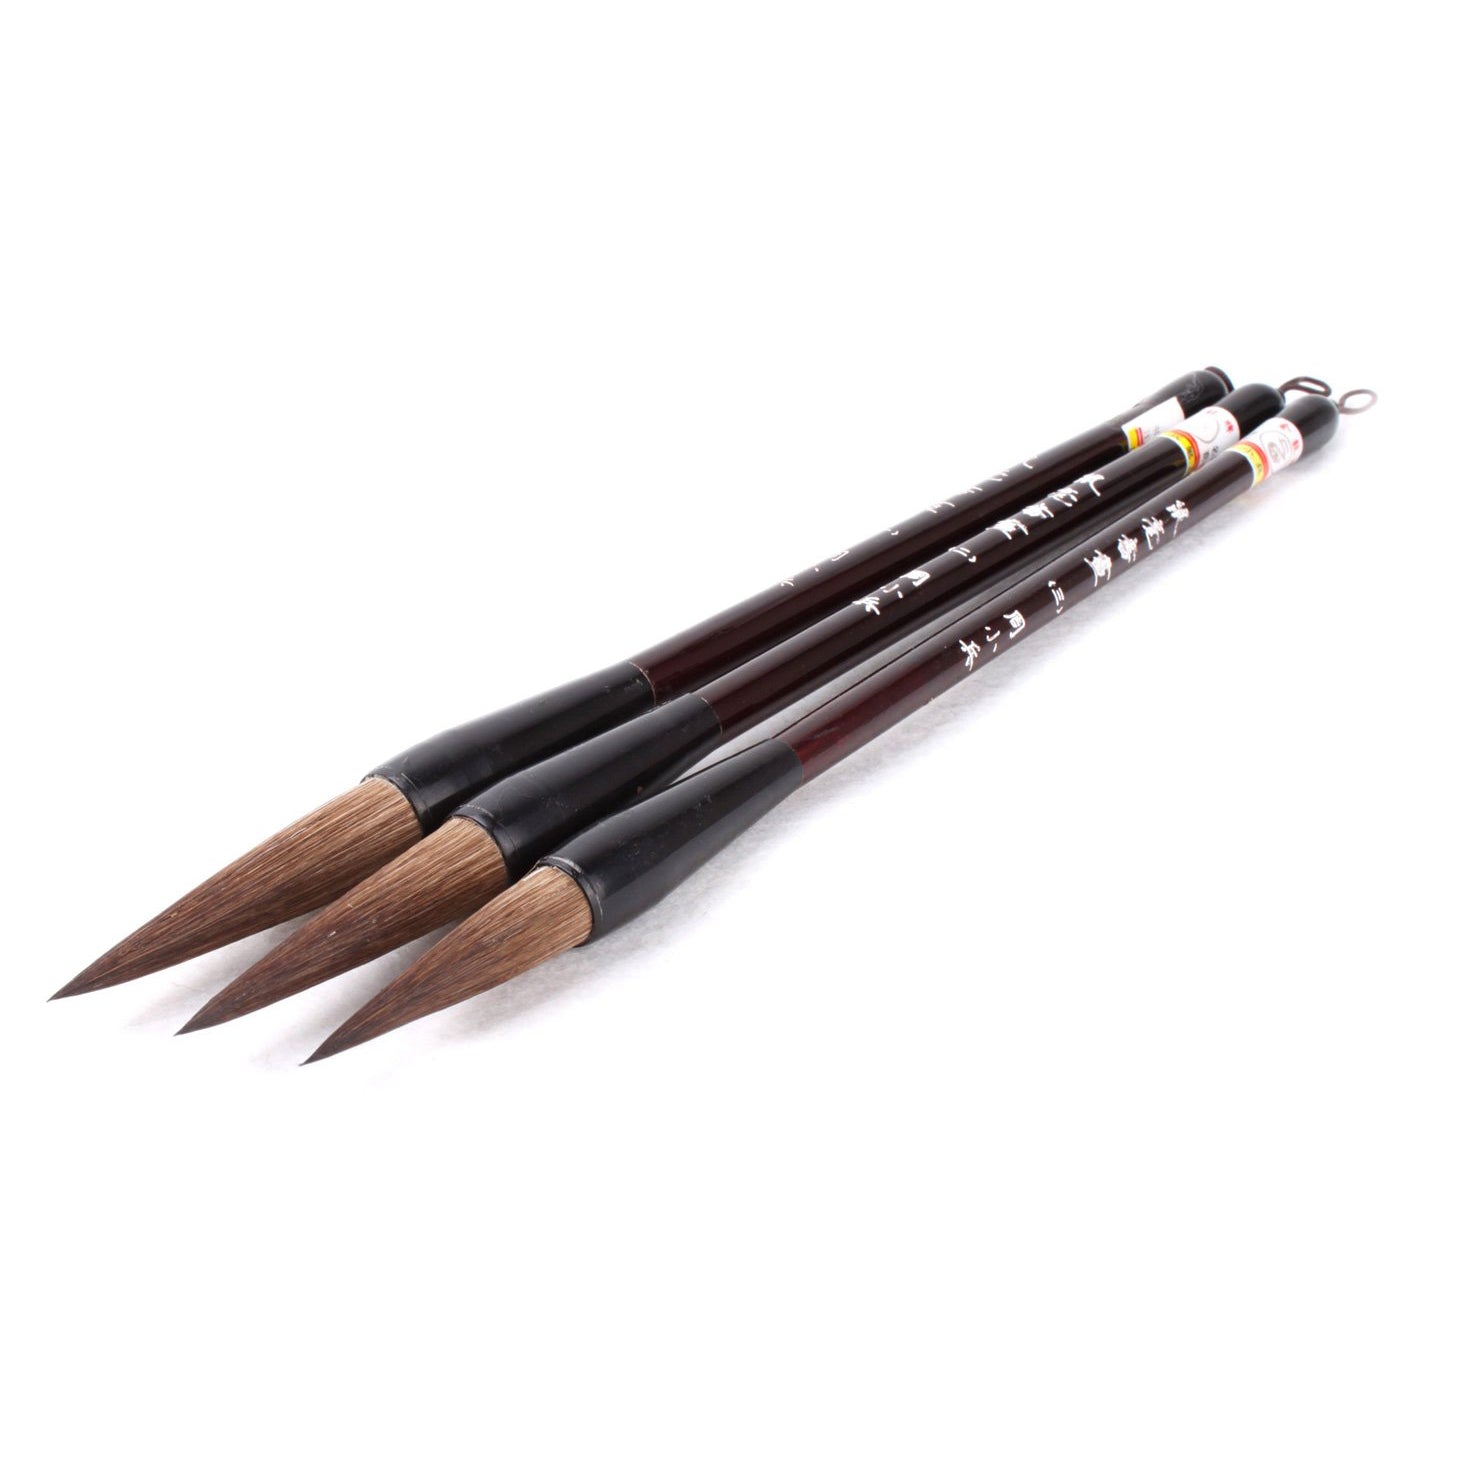 Calligraphy Brush is made of Rat Hair and has a Medium Tip, assortment of 3